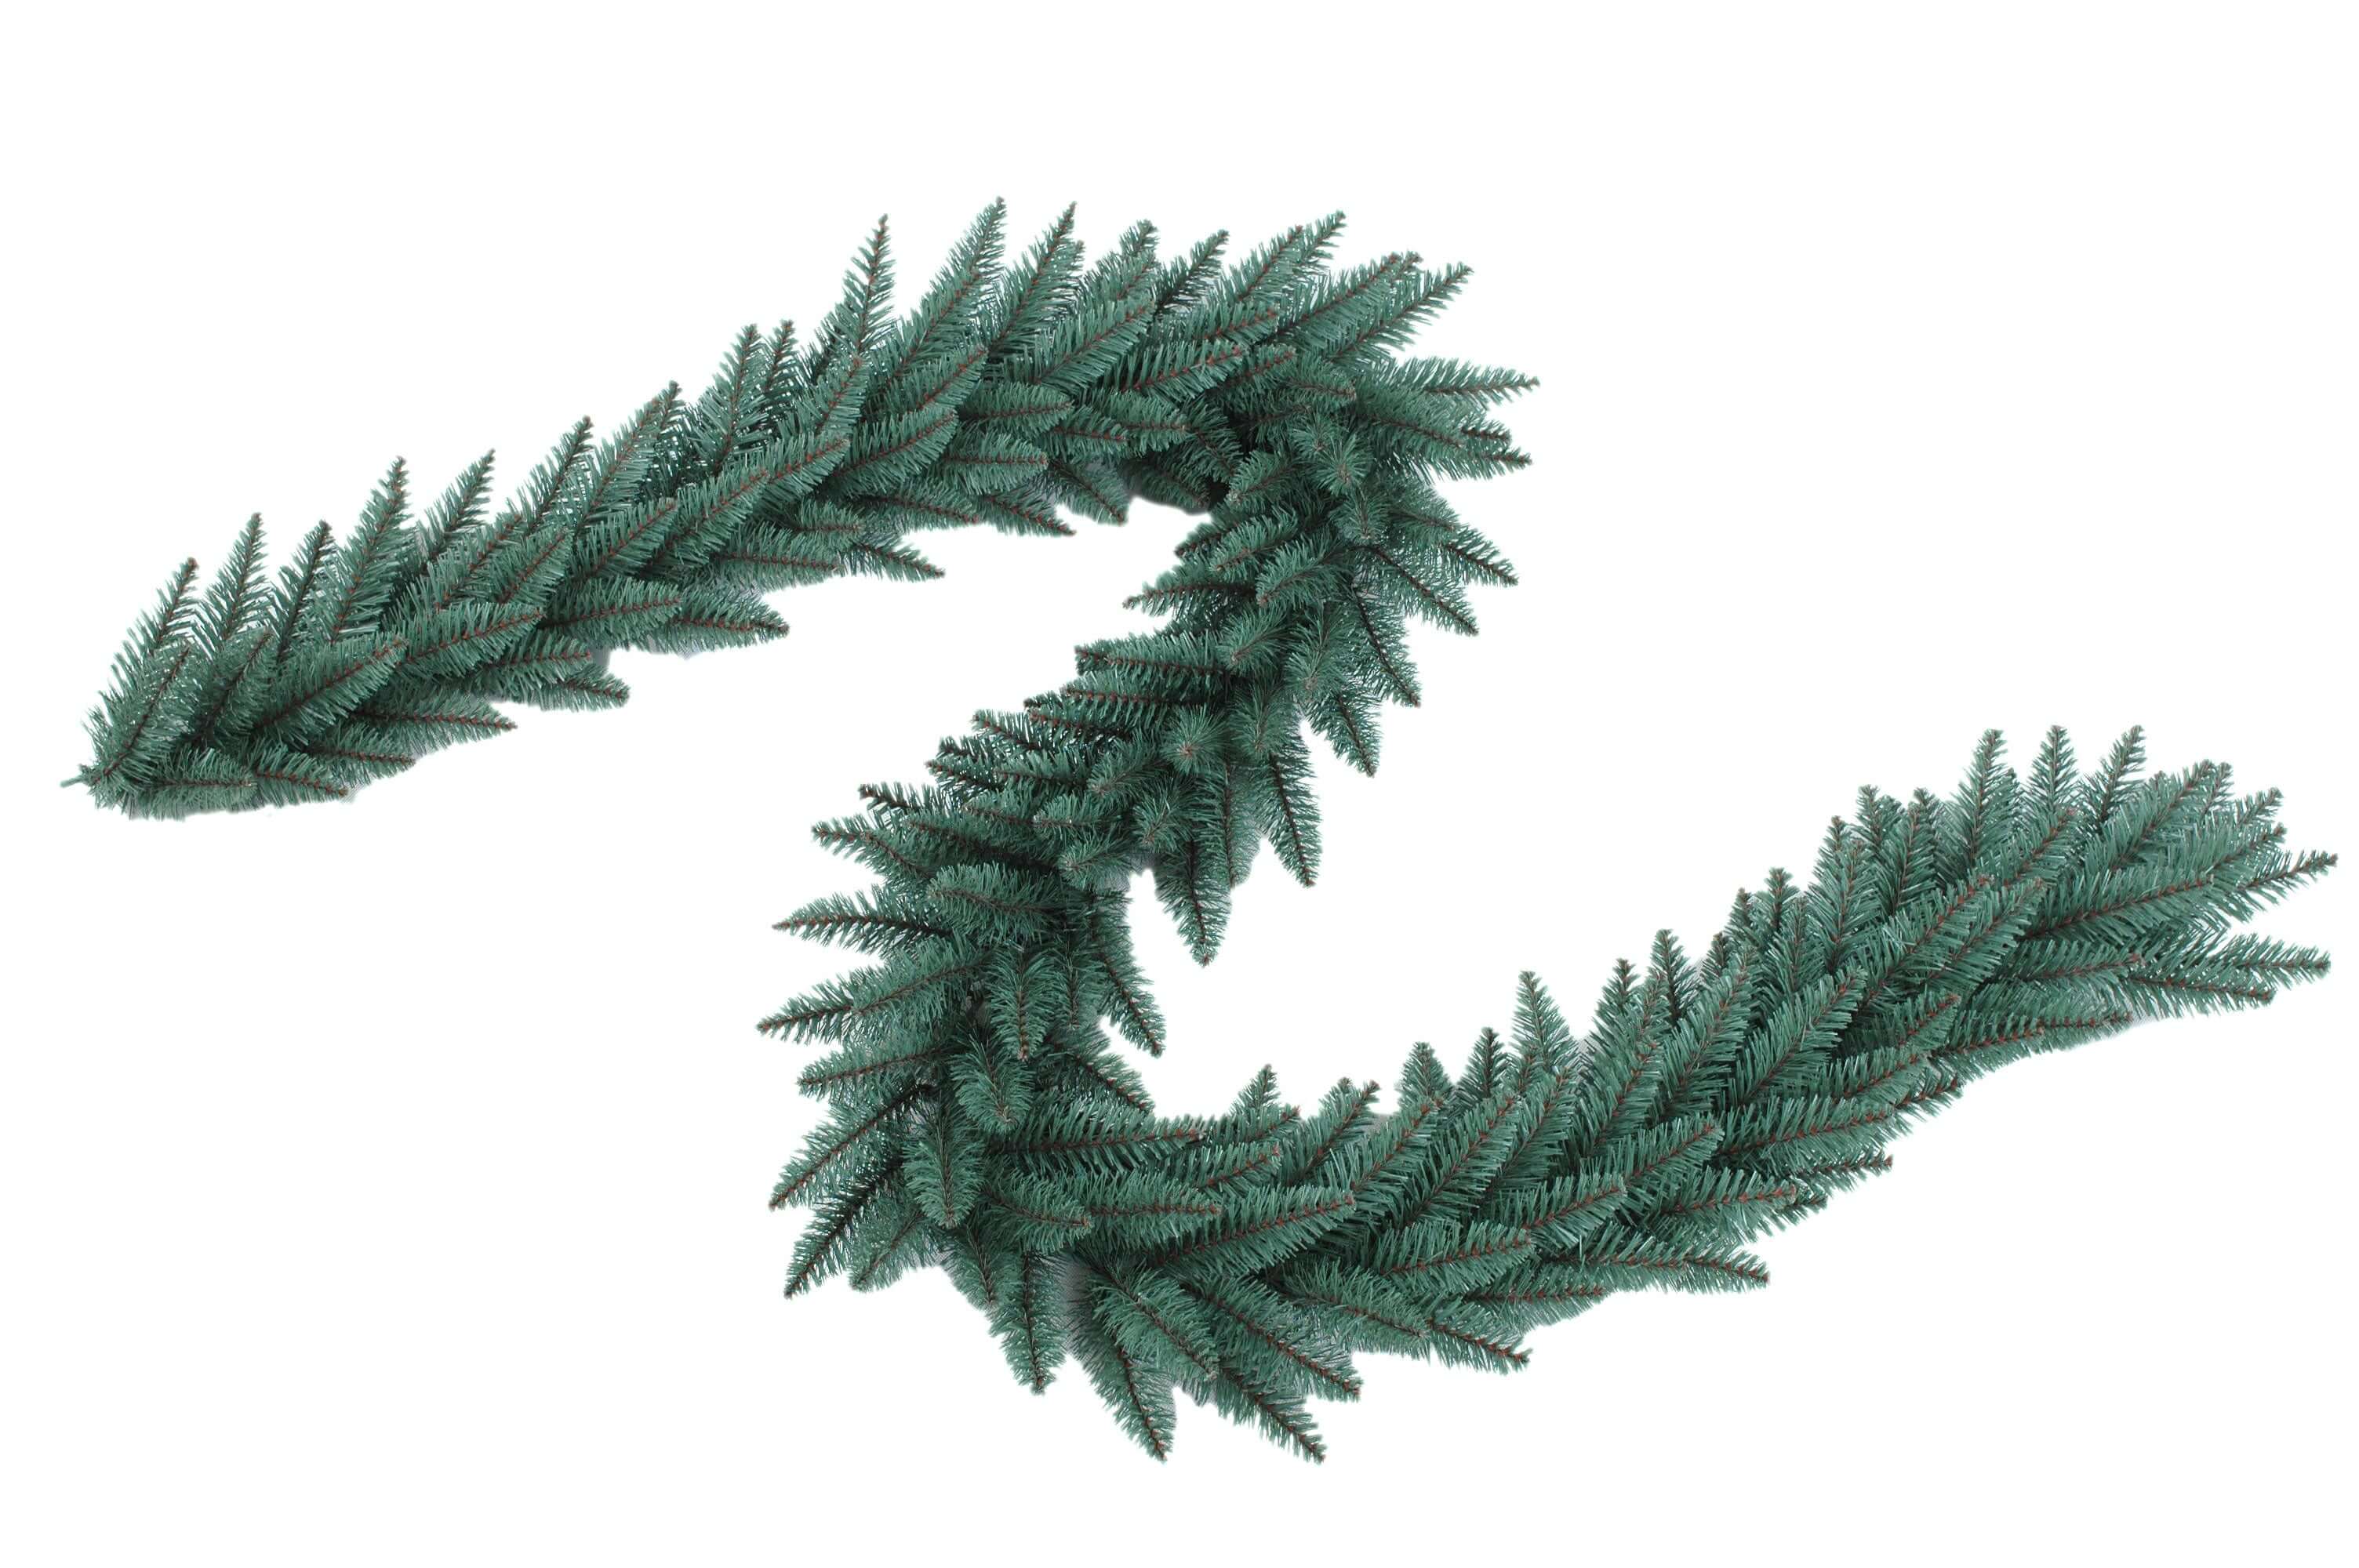 King of Christmas 9' x 12" Tribeca Spruce Blue Garland with Warm White LED Lights (Plug Operated)